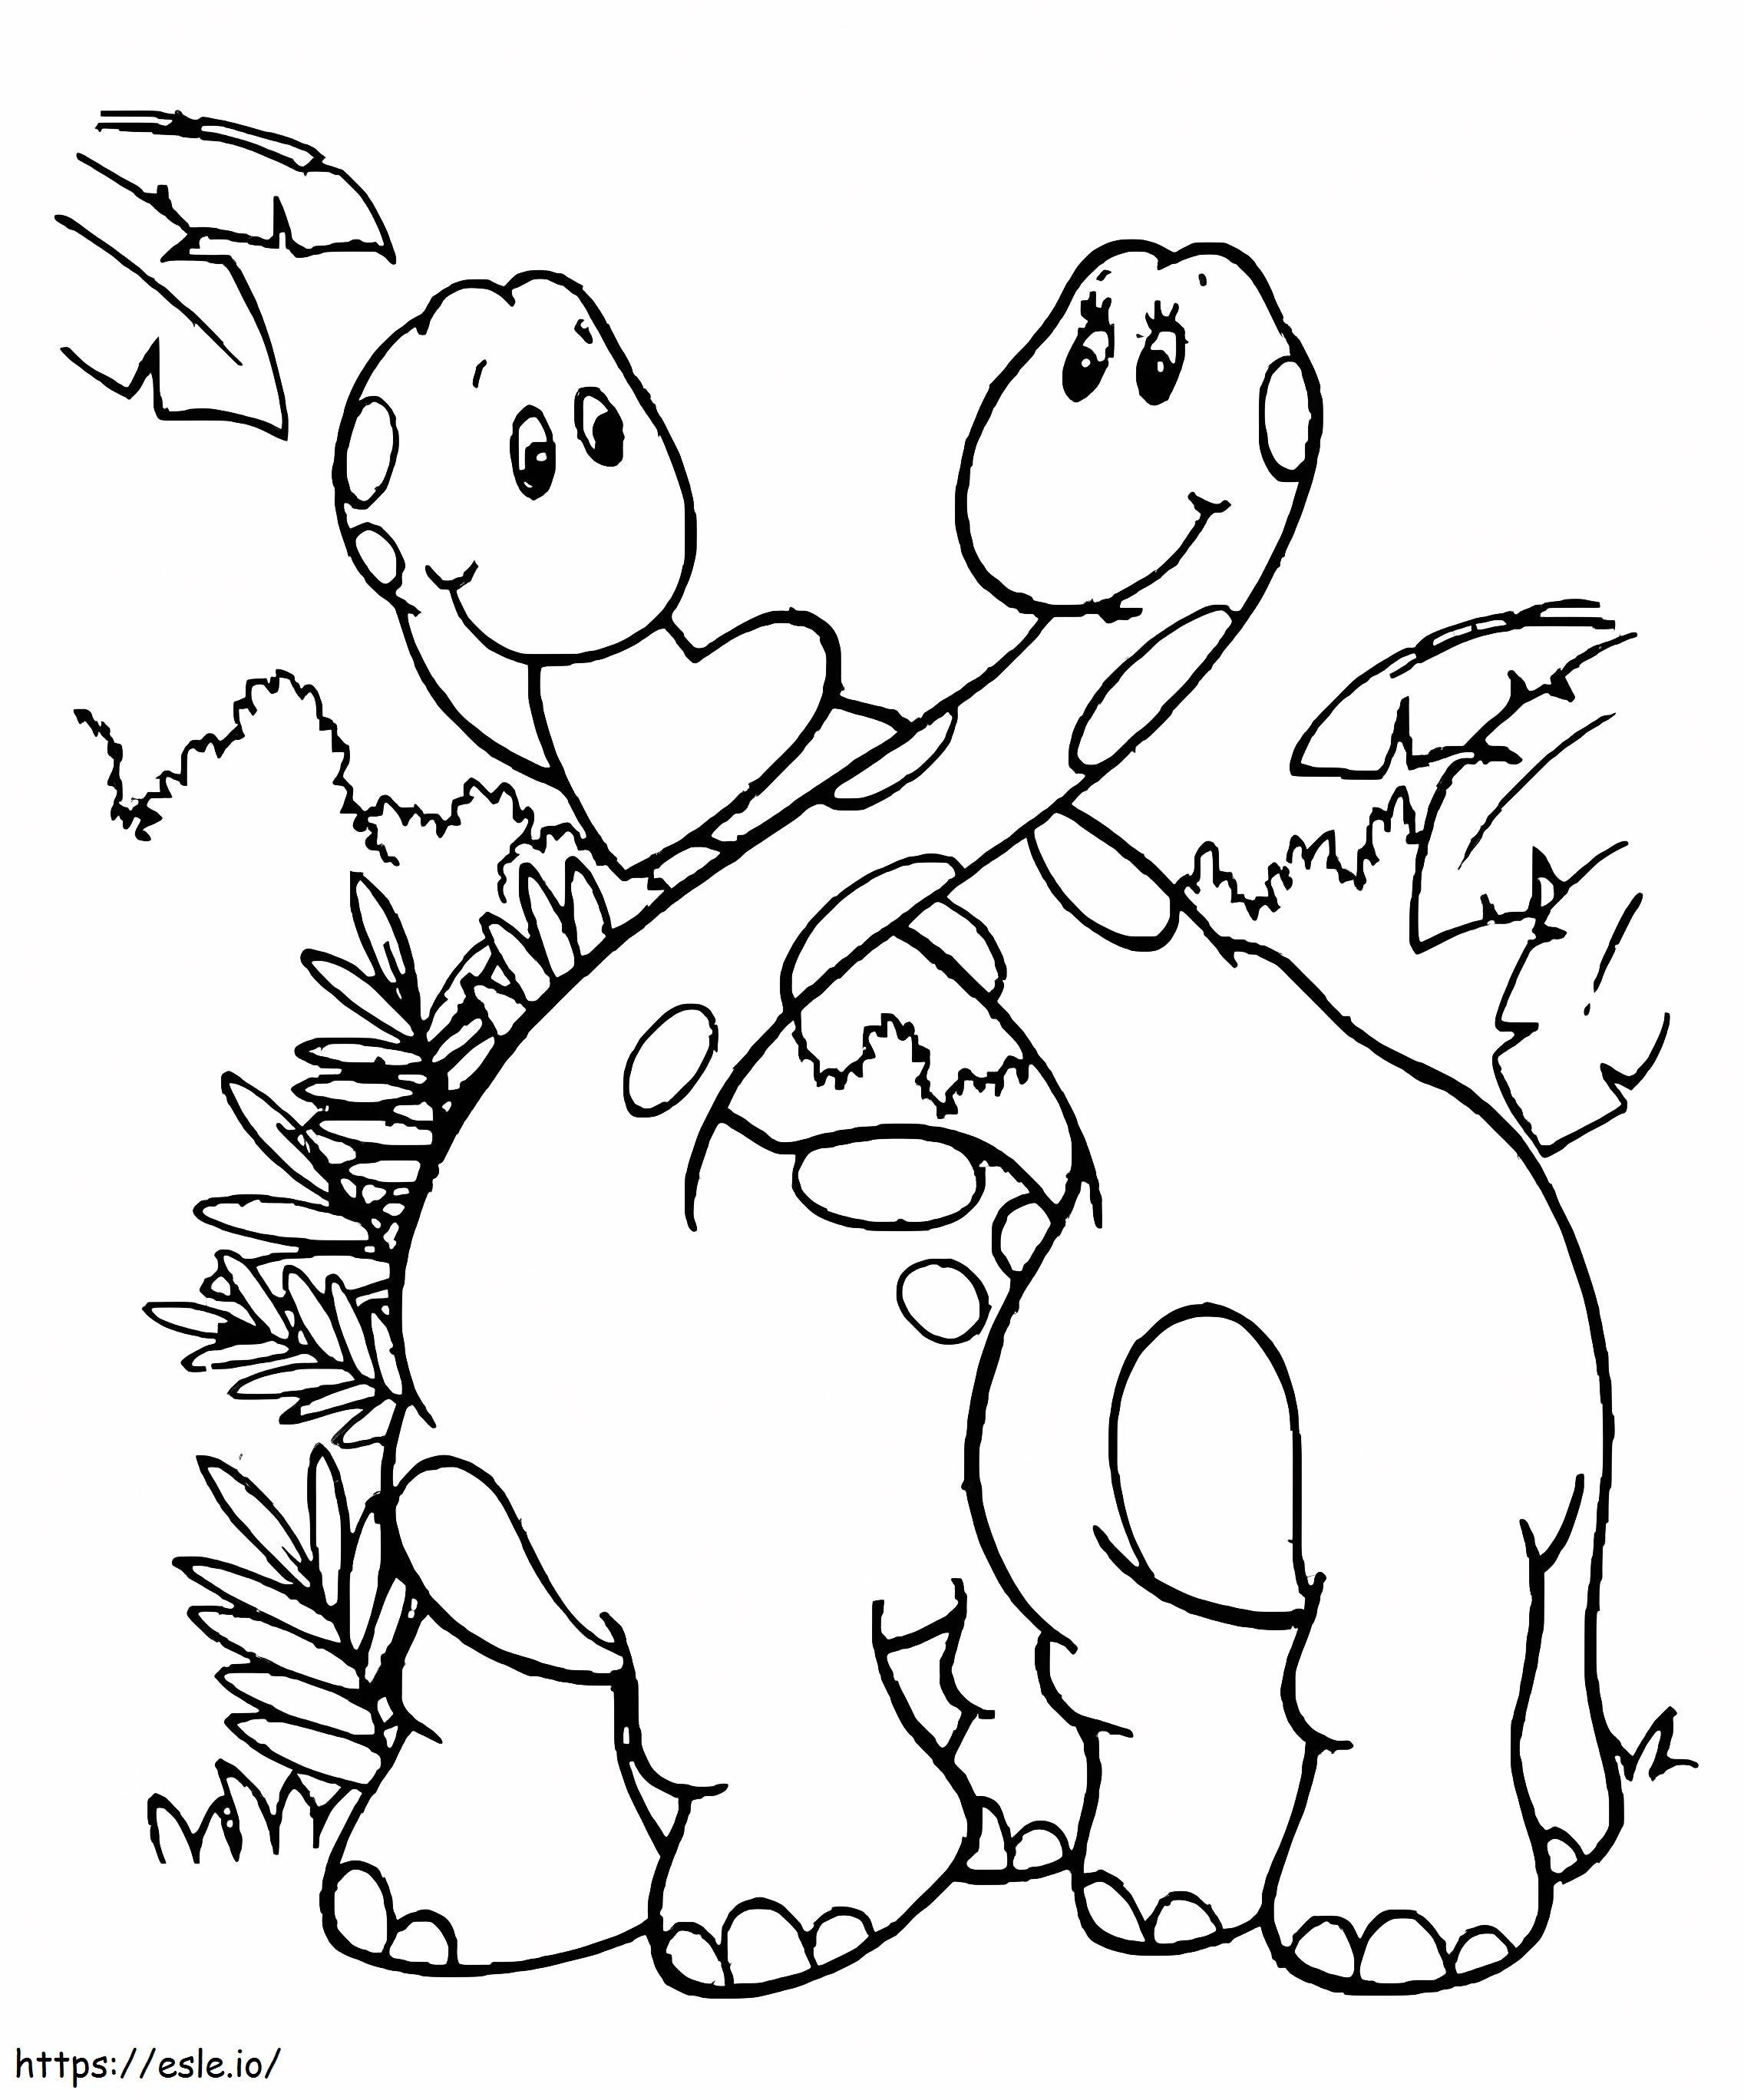 Dino Love coloring page